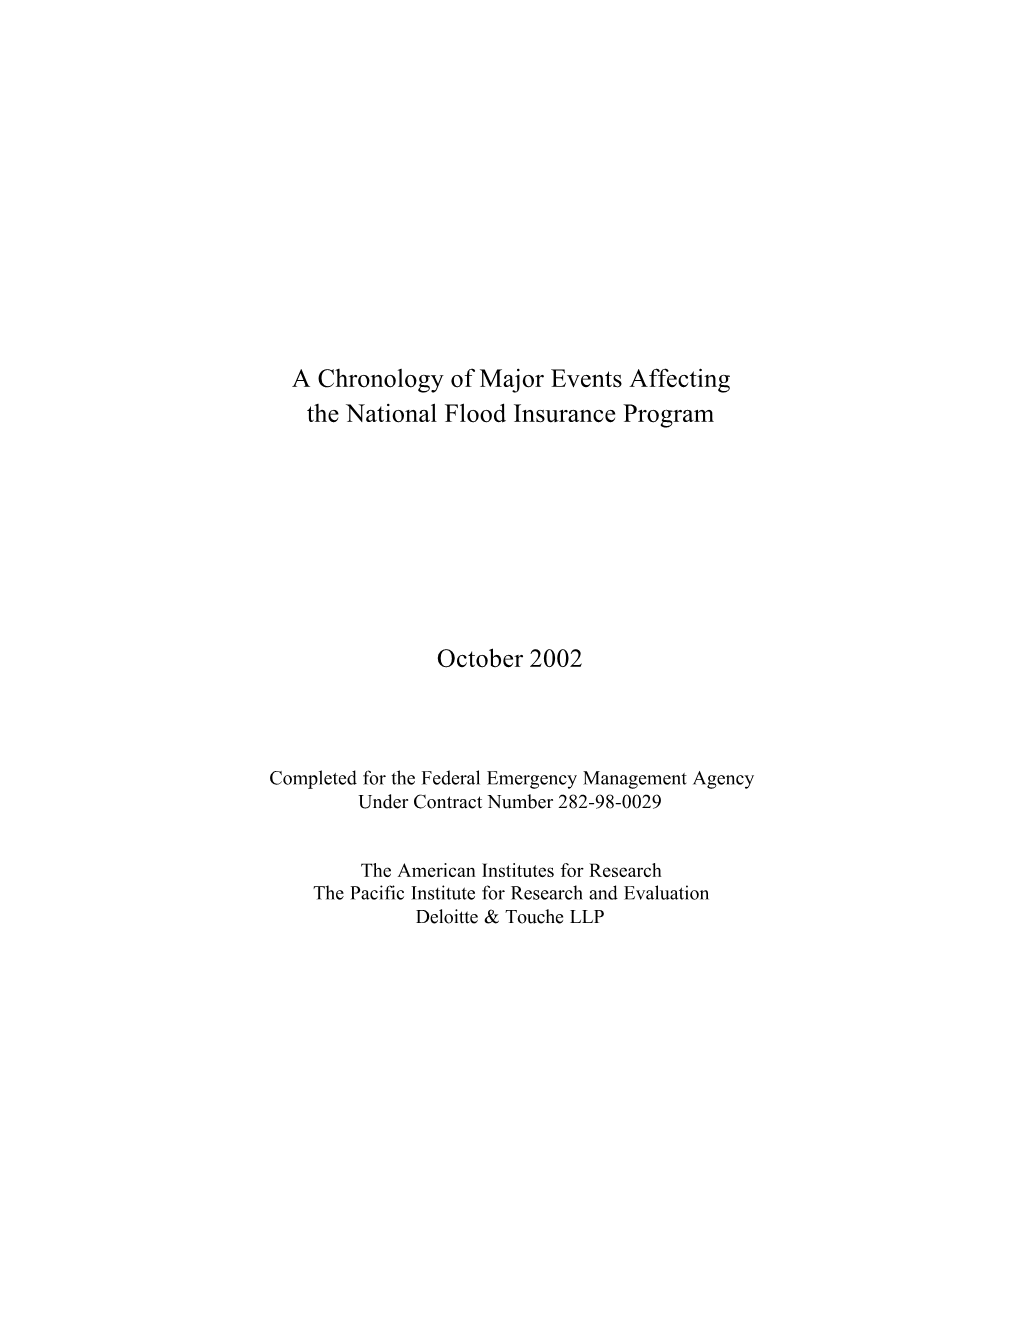 A Chronology of Major Events Affecting the National Flood Insurance Program October 2002